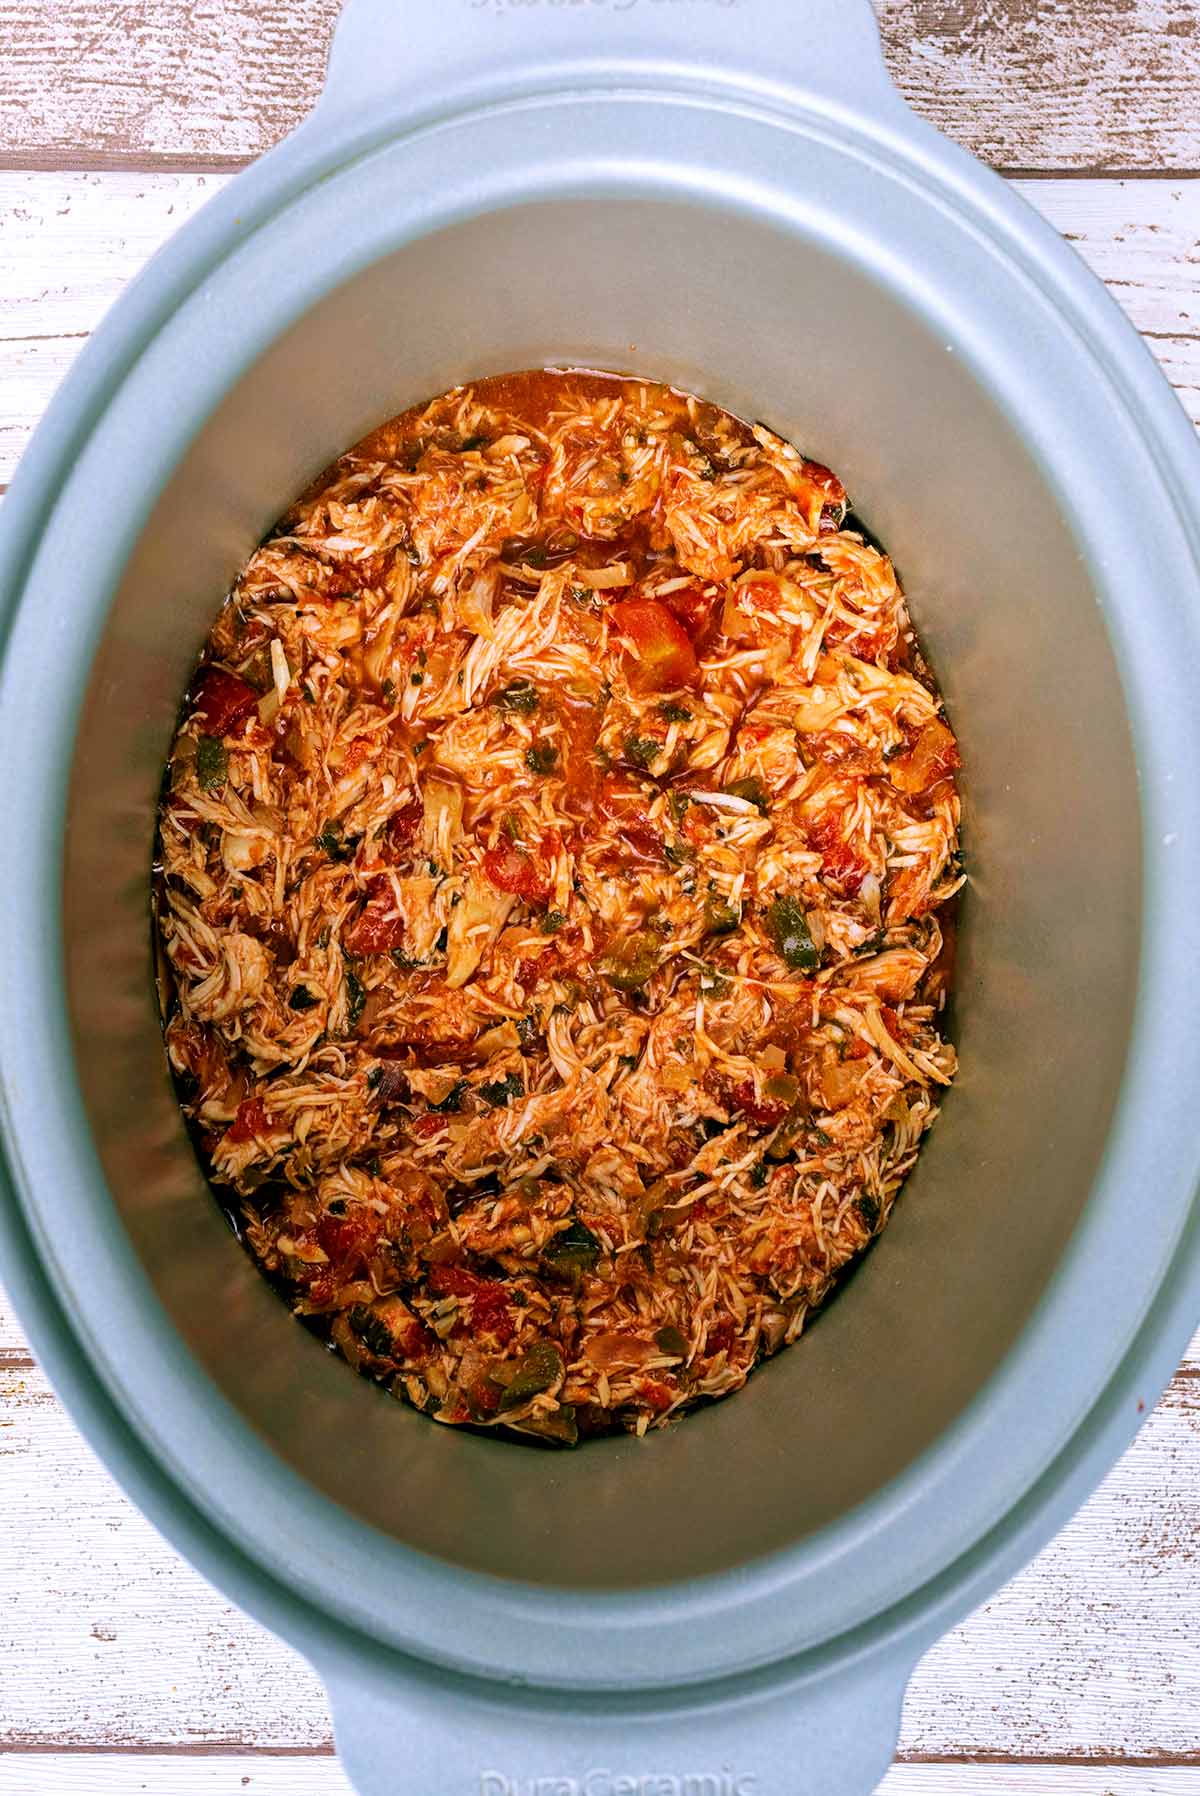 A slow cooker pot containing shredded chicken in a tomato sauce.